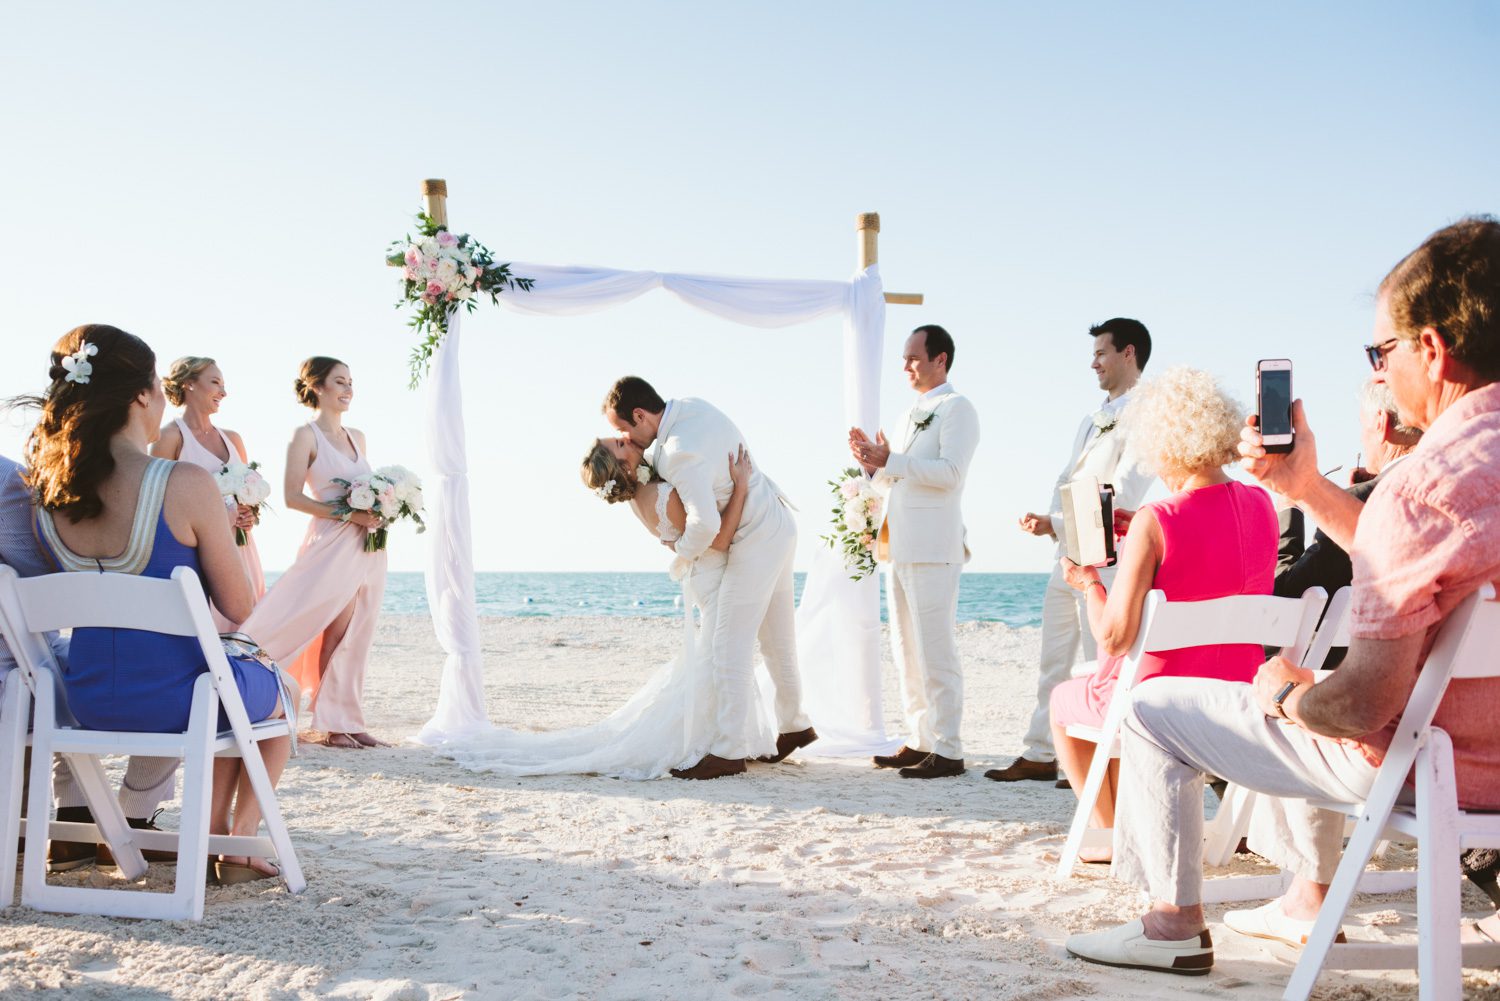 A sunset wedding ceremony on the beach in Key West with a bride and groom kissing.